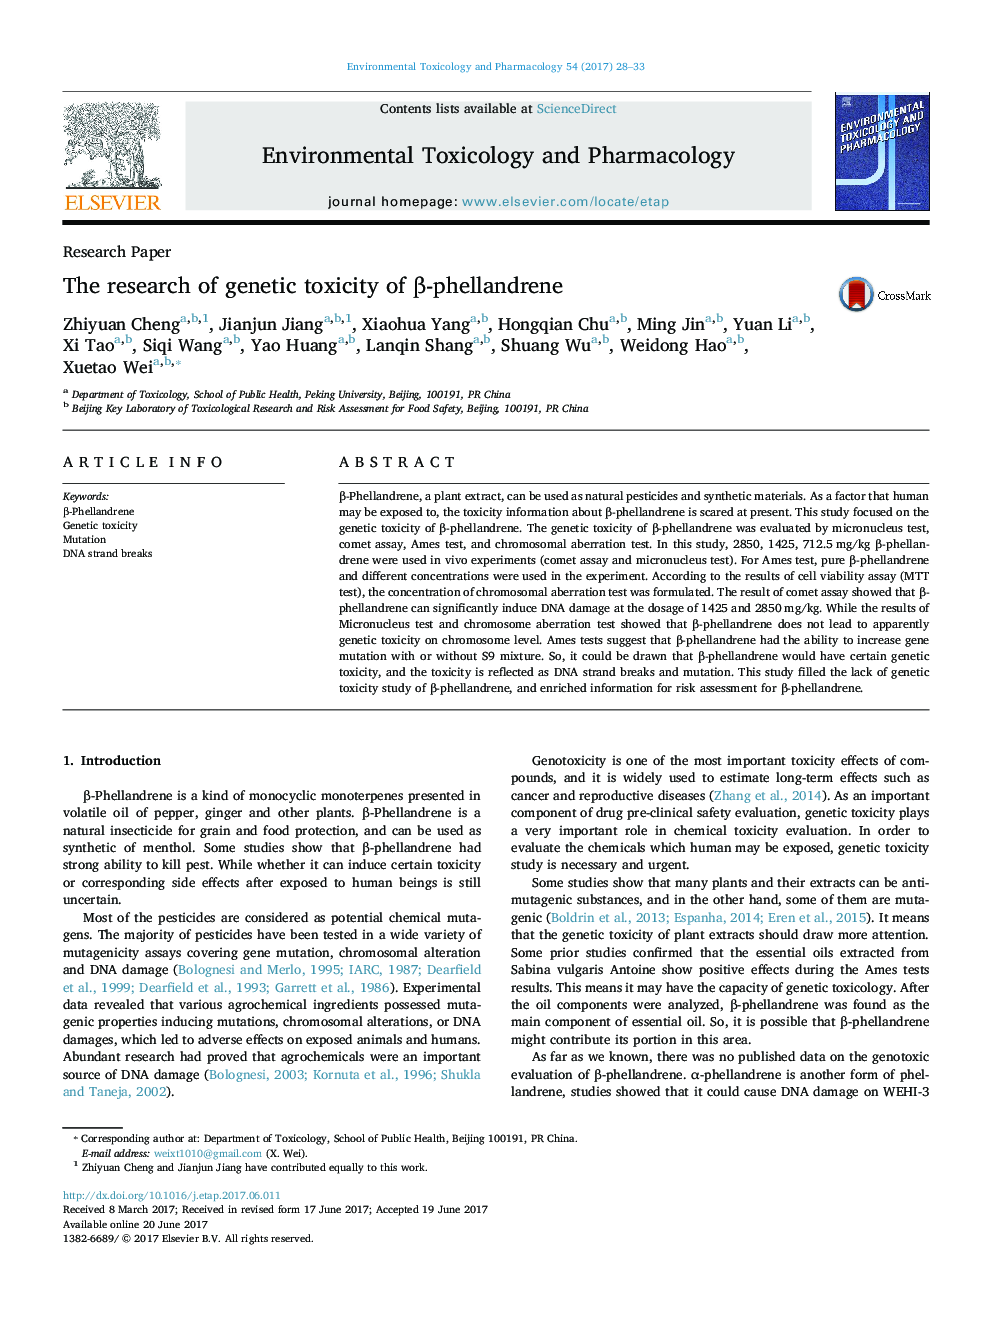 The research of genetic toxicity of Î²-phellandrene